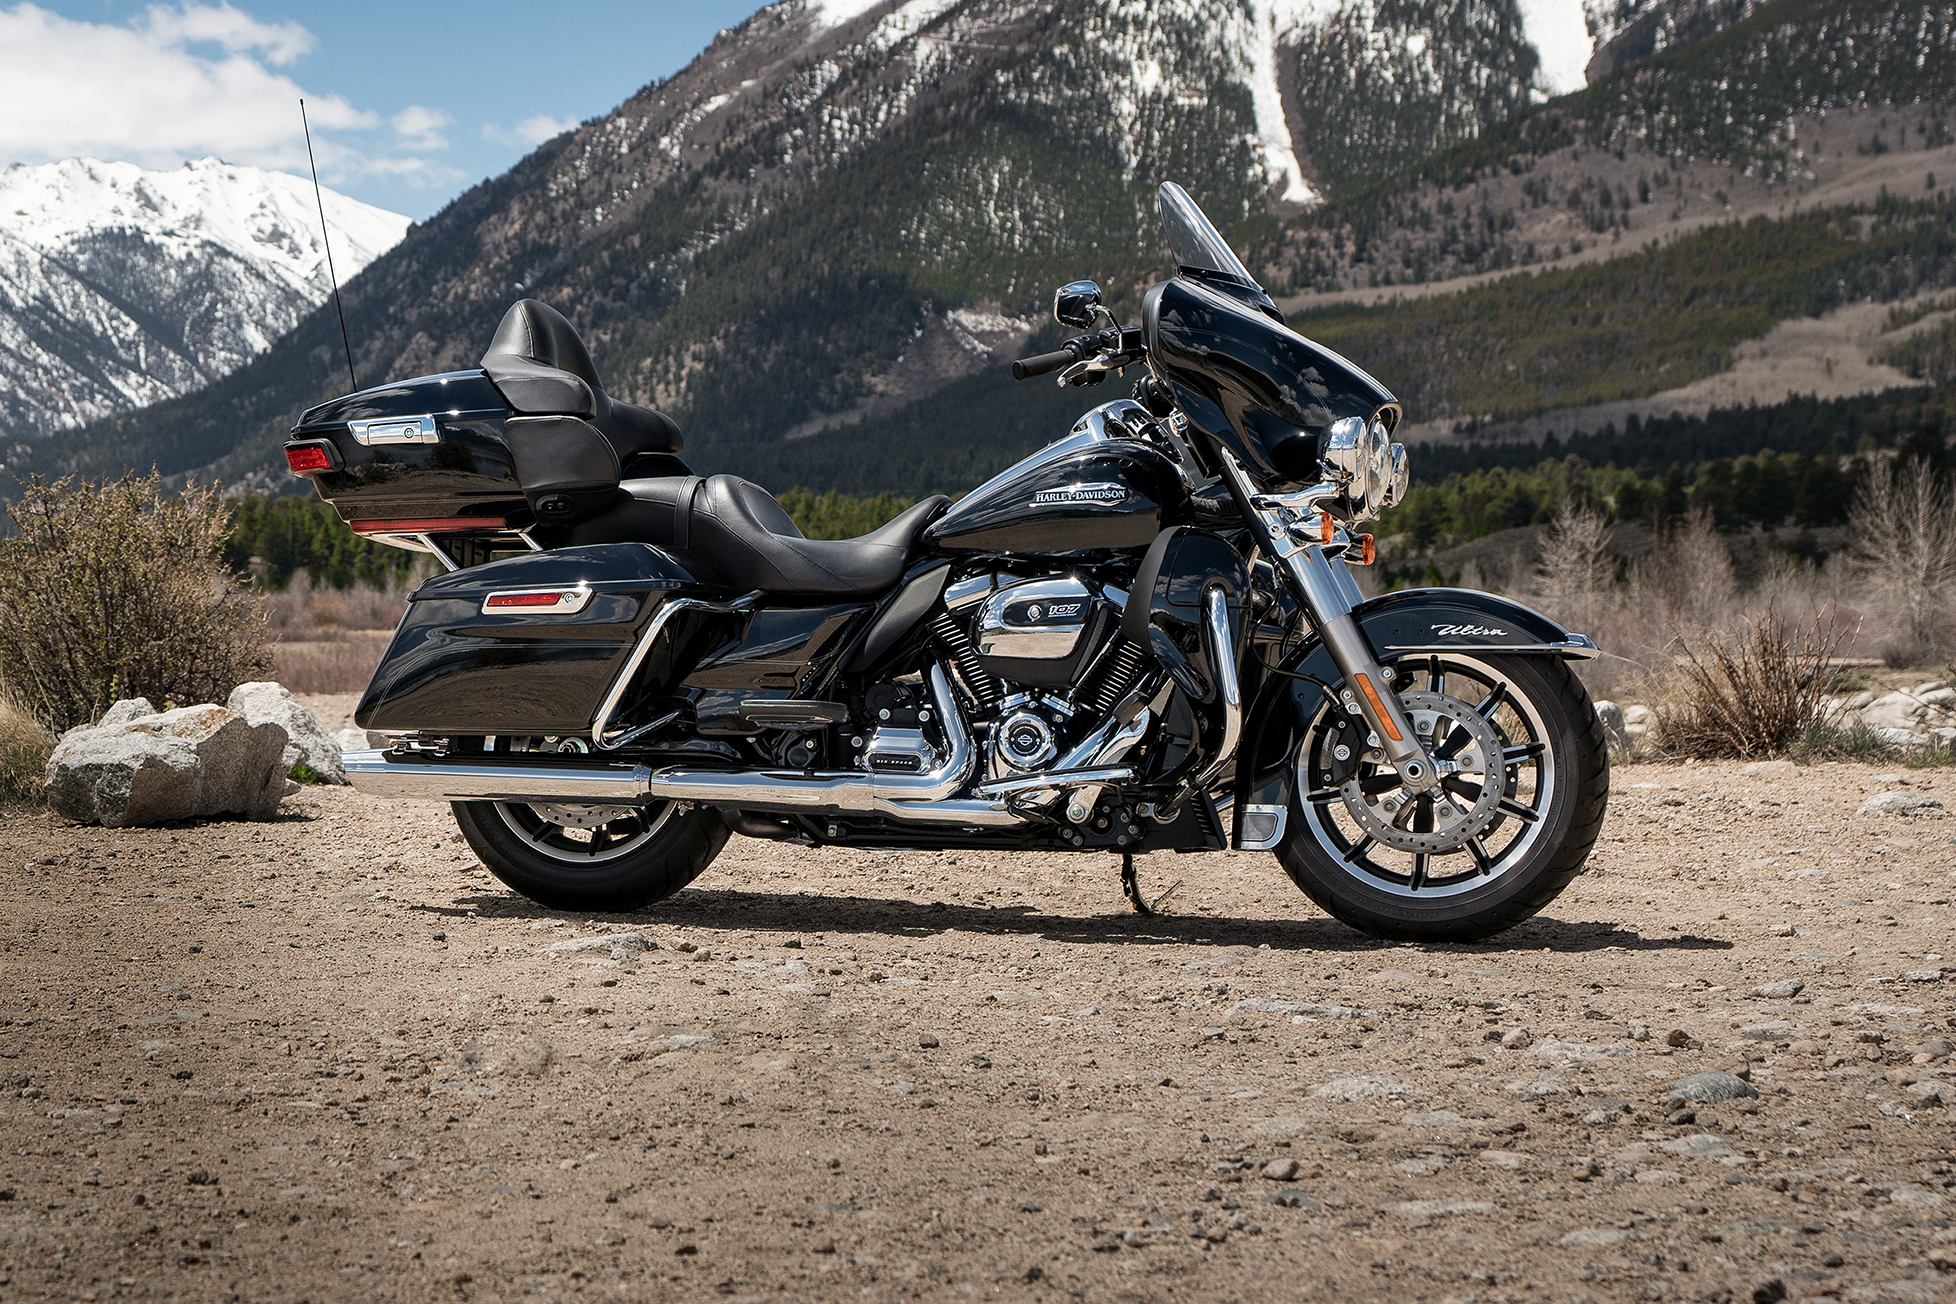 2019 Electra Glide Ultra Classic Motorcycle Harley 